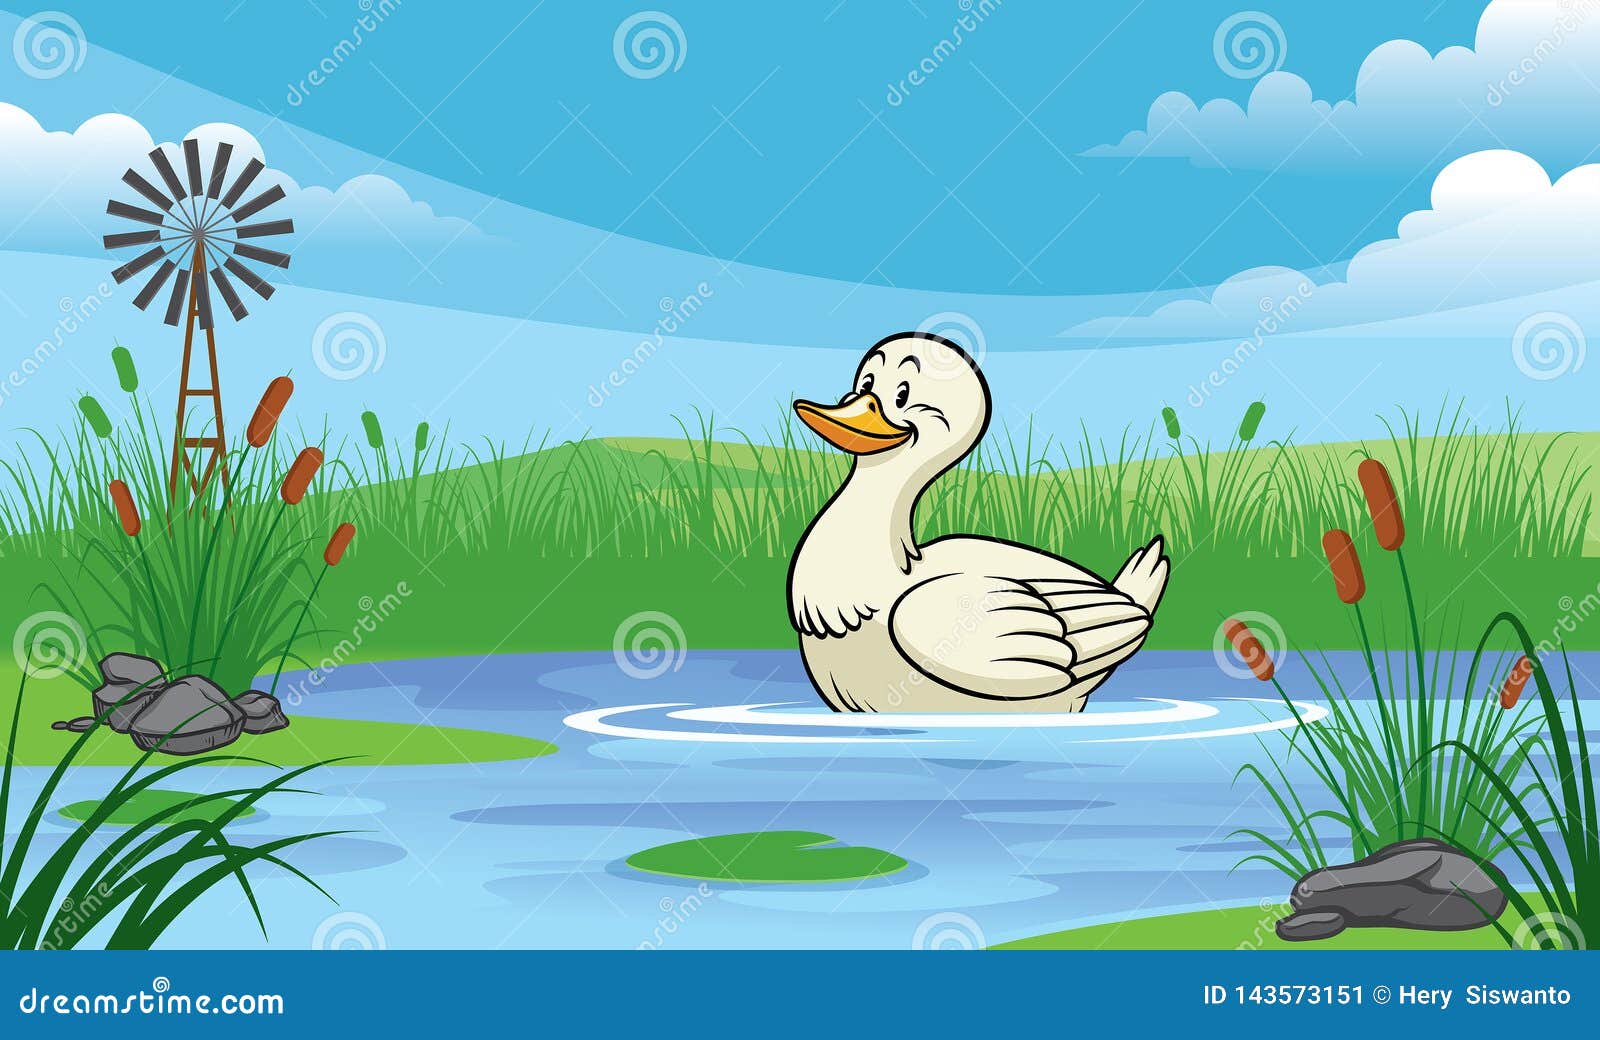 Duck In The Pond With Cartoon Style Stock Vector